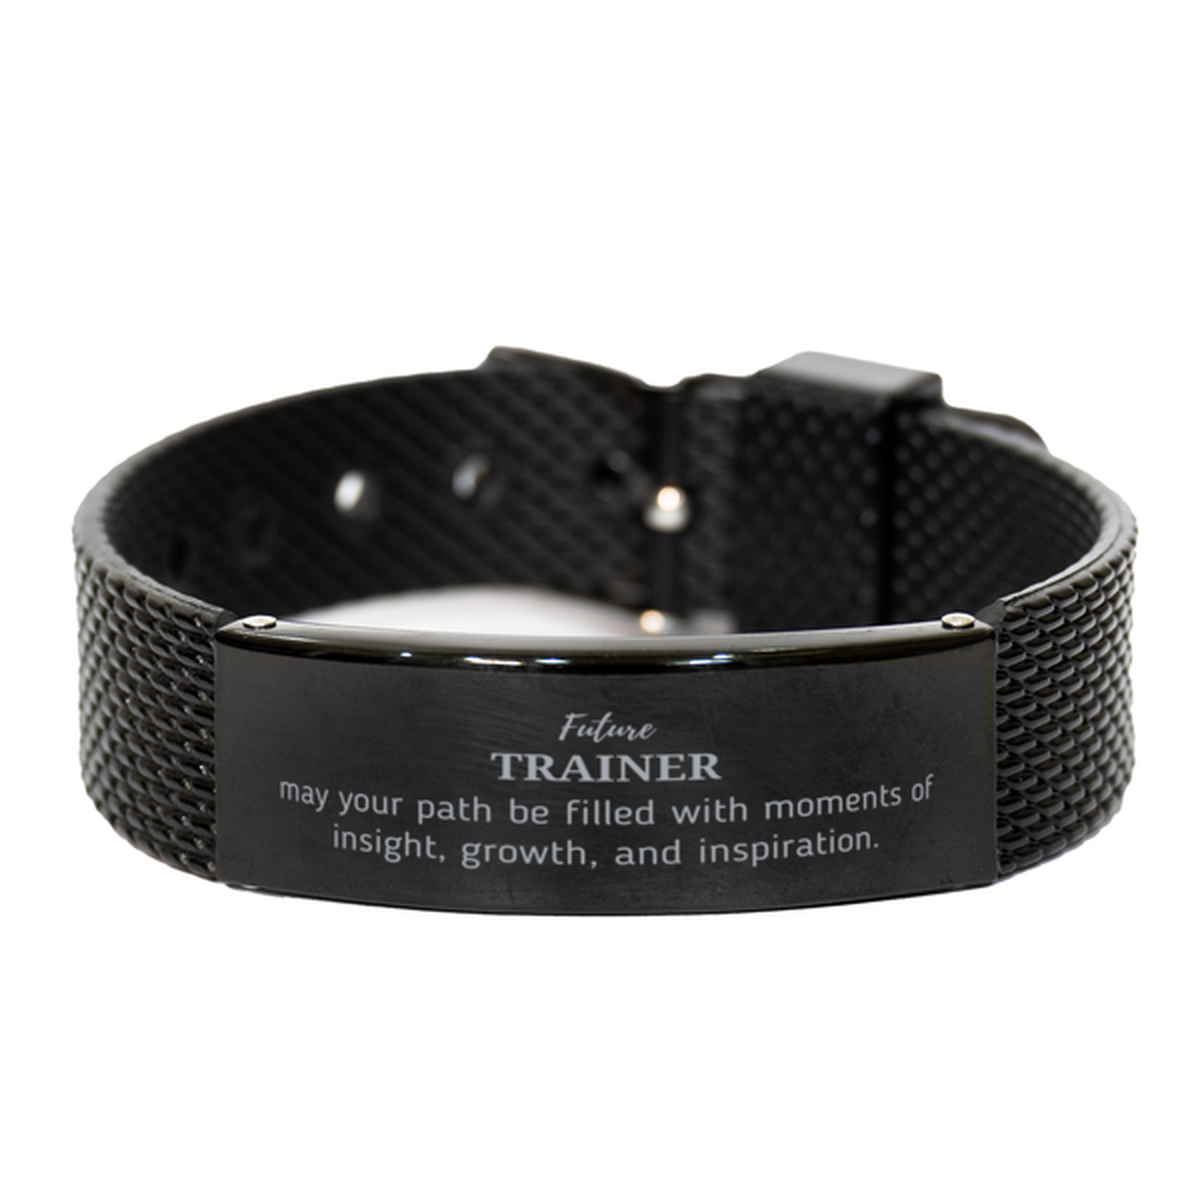 Future Trainer Gifts, May your path be filled with moments of insight, Graduation Gifts for New Trainer, Christmas Unique Black Shark Mesh Bracelet For Men, Women, Friends